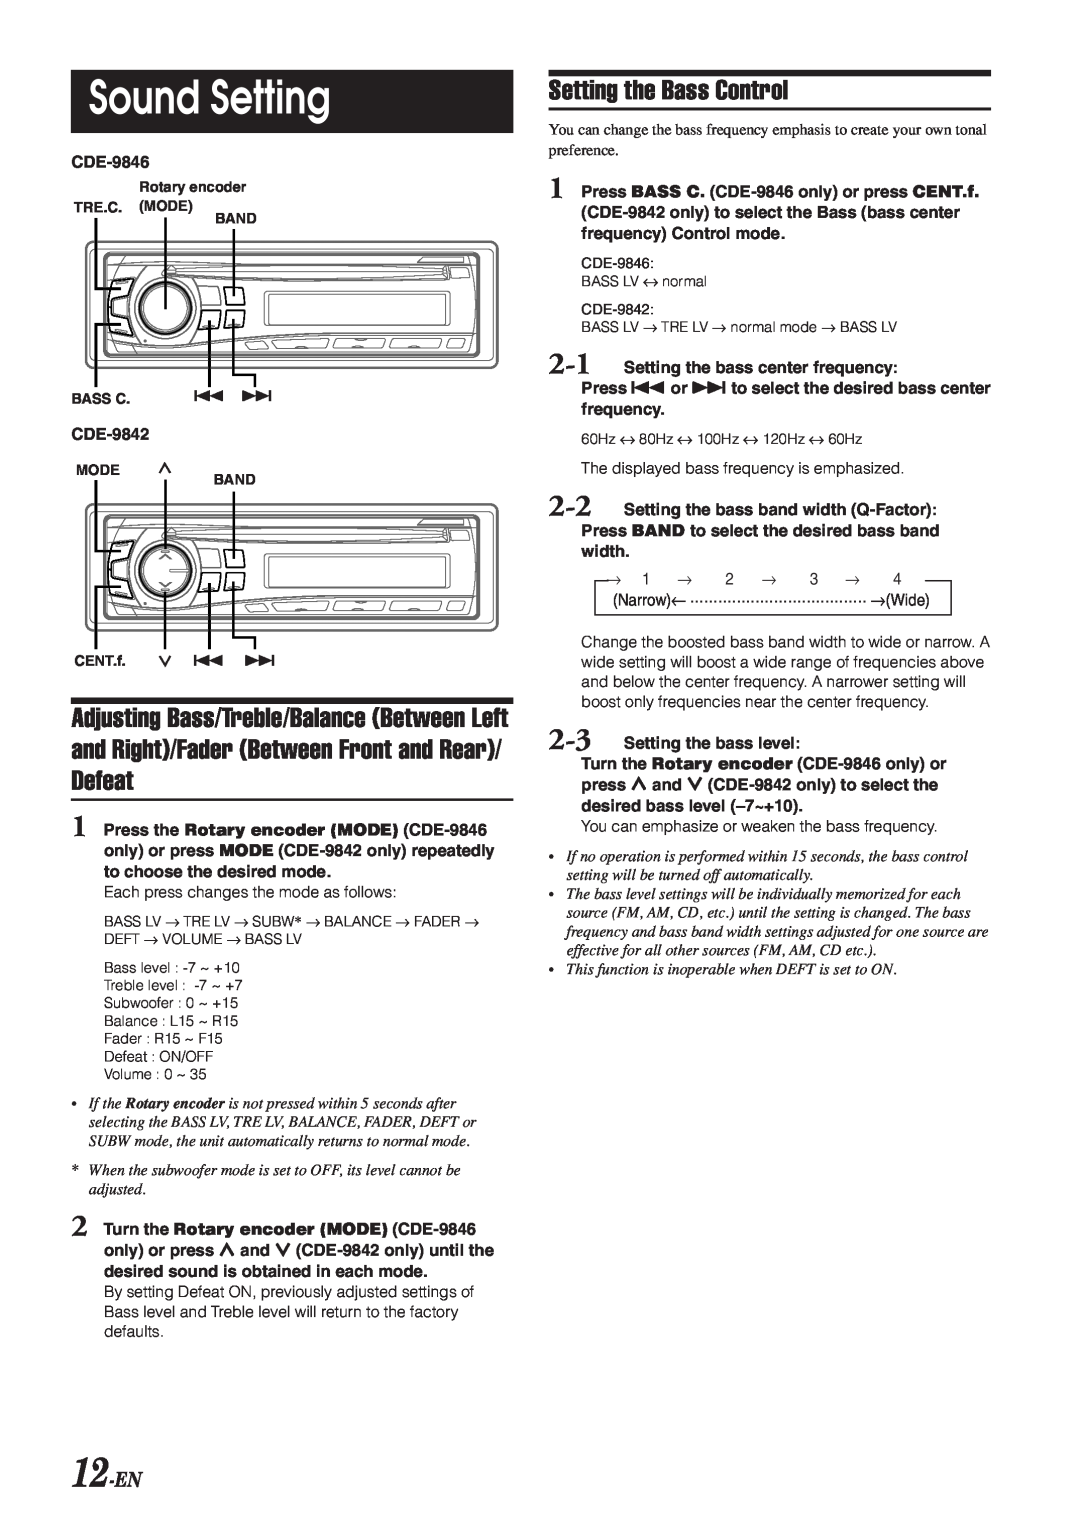 Alpine CDE-9842 owner manual Sound Setting, Defeat, Setting the Bass Control, 12-EN, and Right/Fader Between Front and Rear 